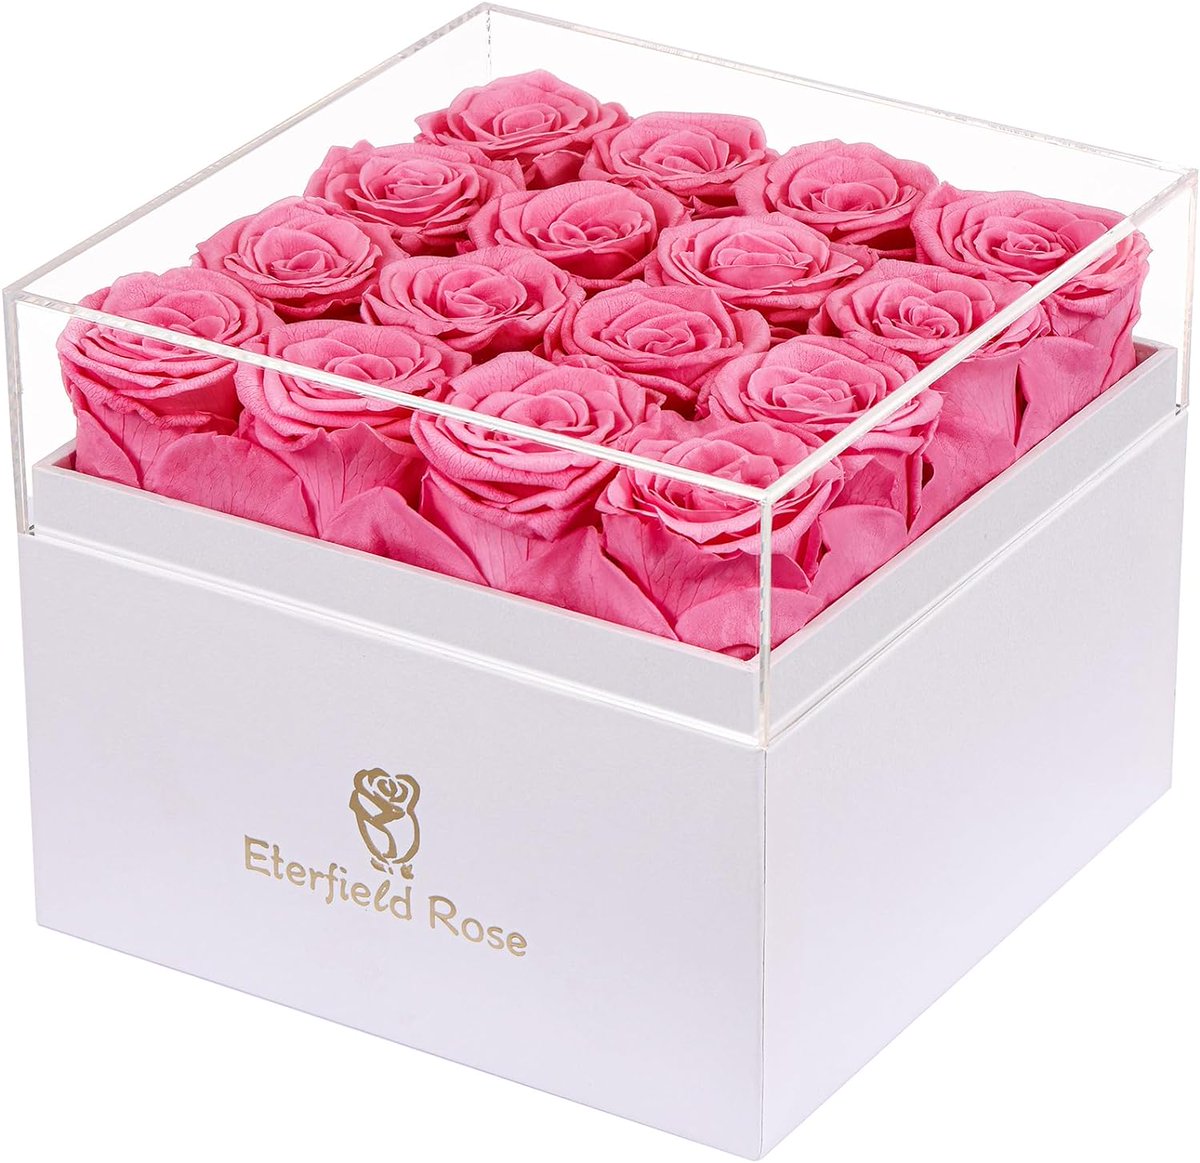 ✨ Transform ordinary moments into everlasting memories with our 100% Real Preserved Roses! 🌹🎀 Each box is a masterpiece, containing 16 immortal roses in an elegant white box. 🎁 The perfect gift! 💖 #EternalRoses #GiftIdeas #ad

Order here: amzn.to/48dmS5m